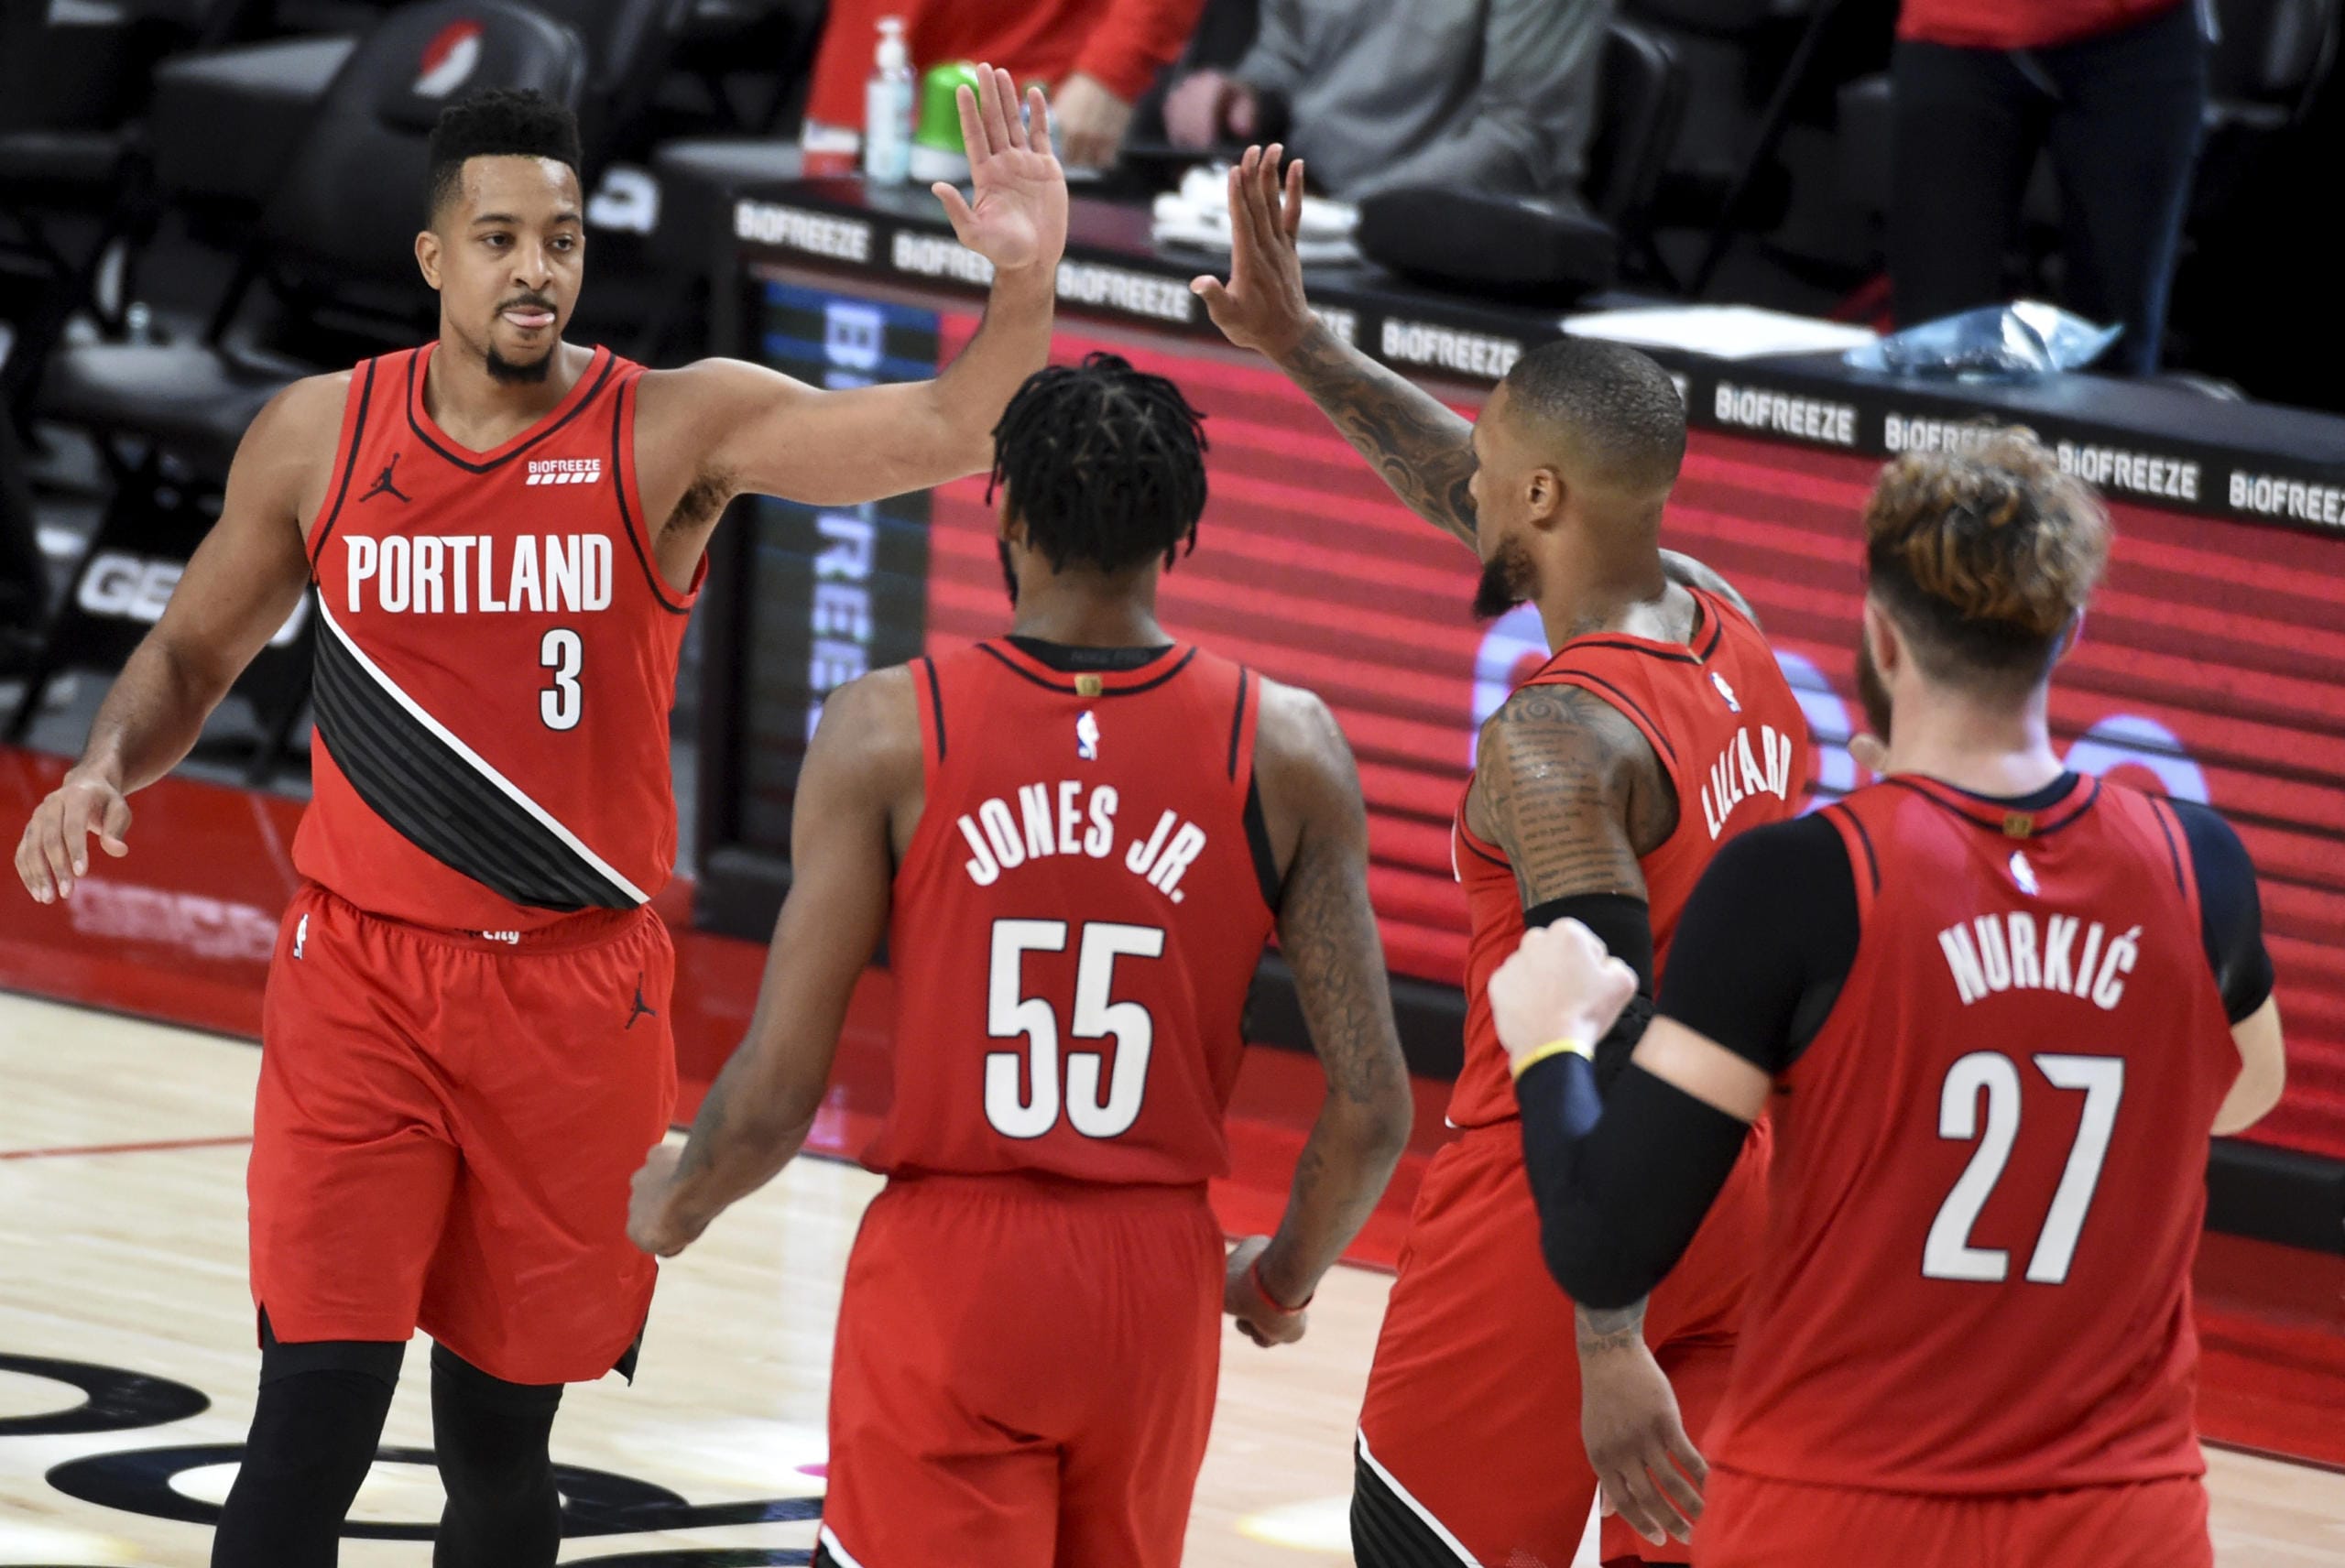 Portland Trail Blazers guard CJ McCollum, left, celebrates with teammates after hitting a shot to give the Blazers the lead late in overtime of an NBA basketball game against the Houston Rockets in Portland, Ore., Saturday, Dec. 26, 2020. The Blazers won 128-126.